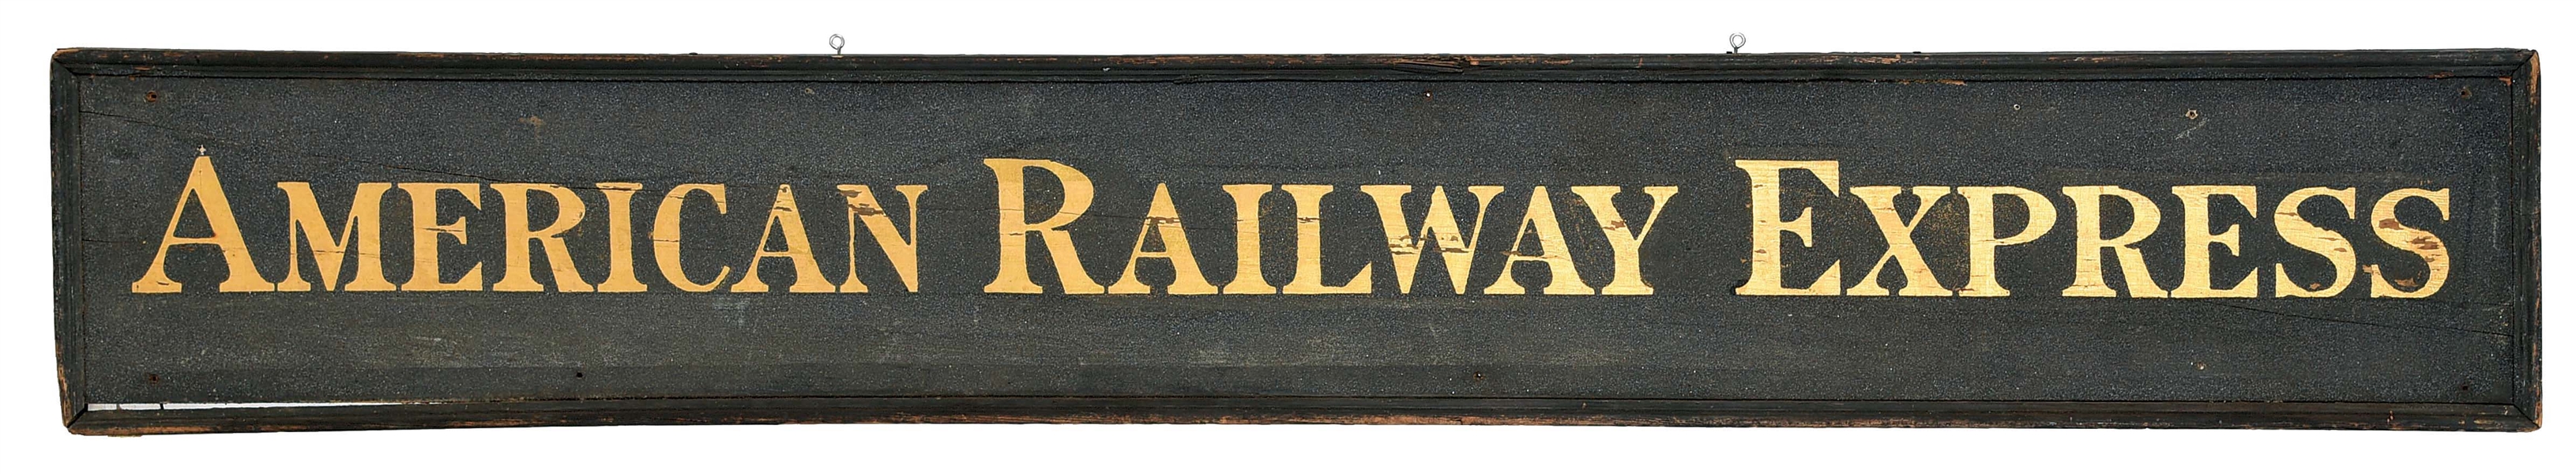 AMERICAN RAILWAY EXPRESS FRAMED SIGN.